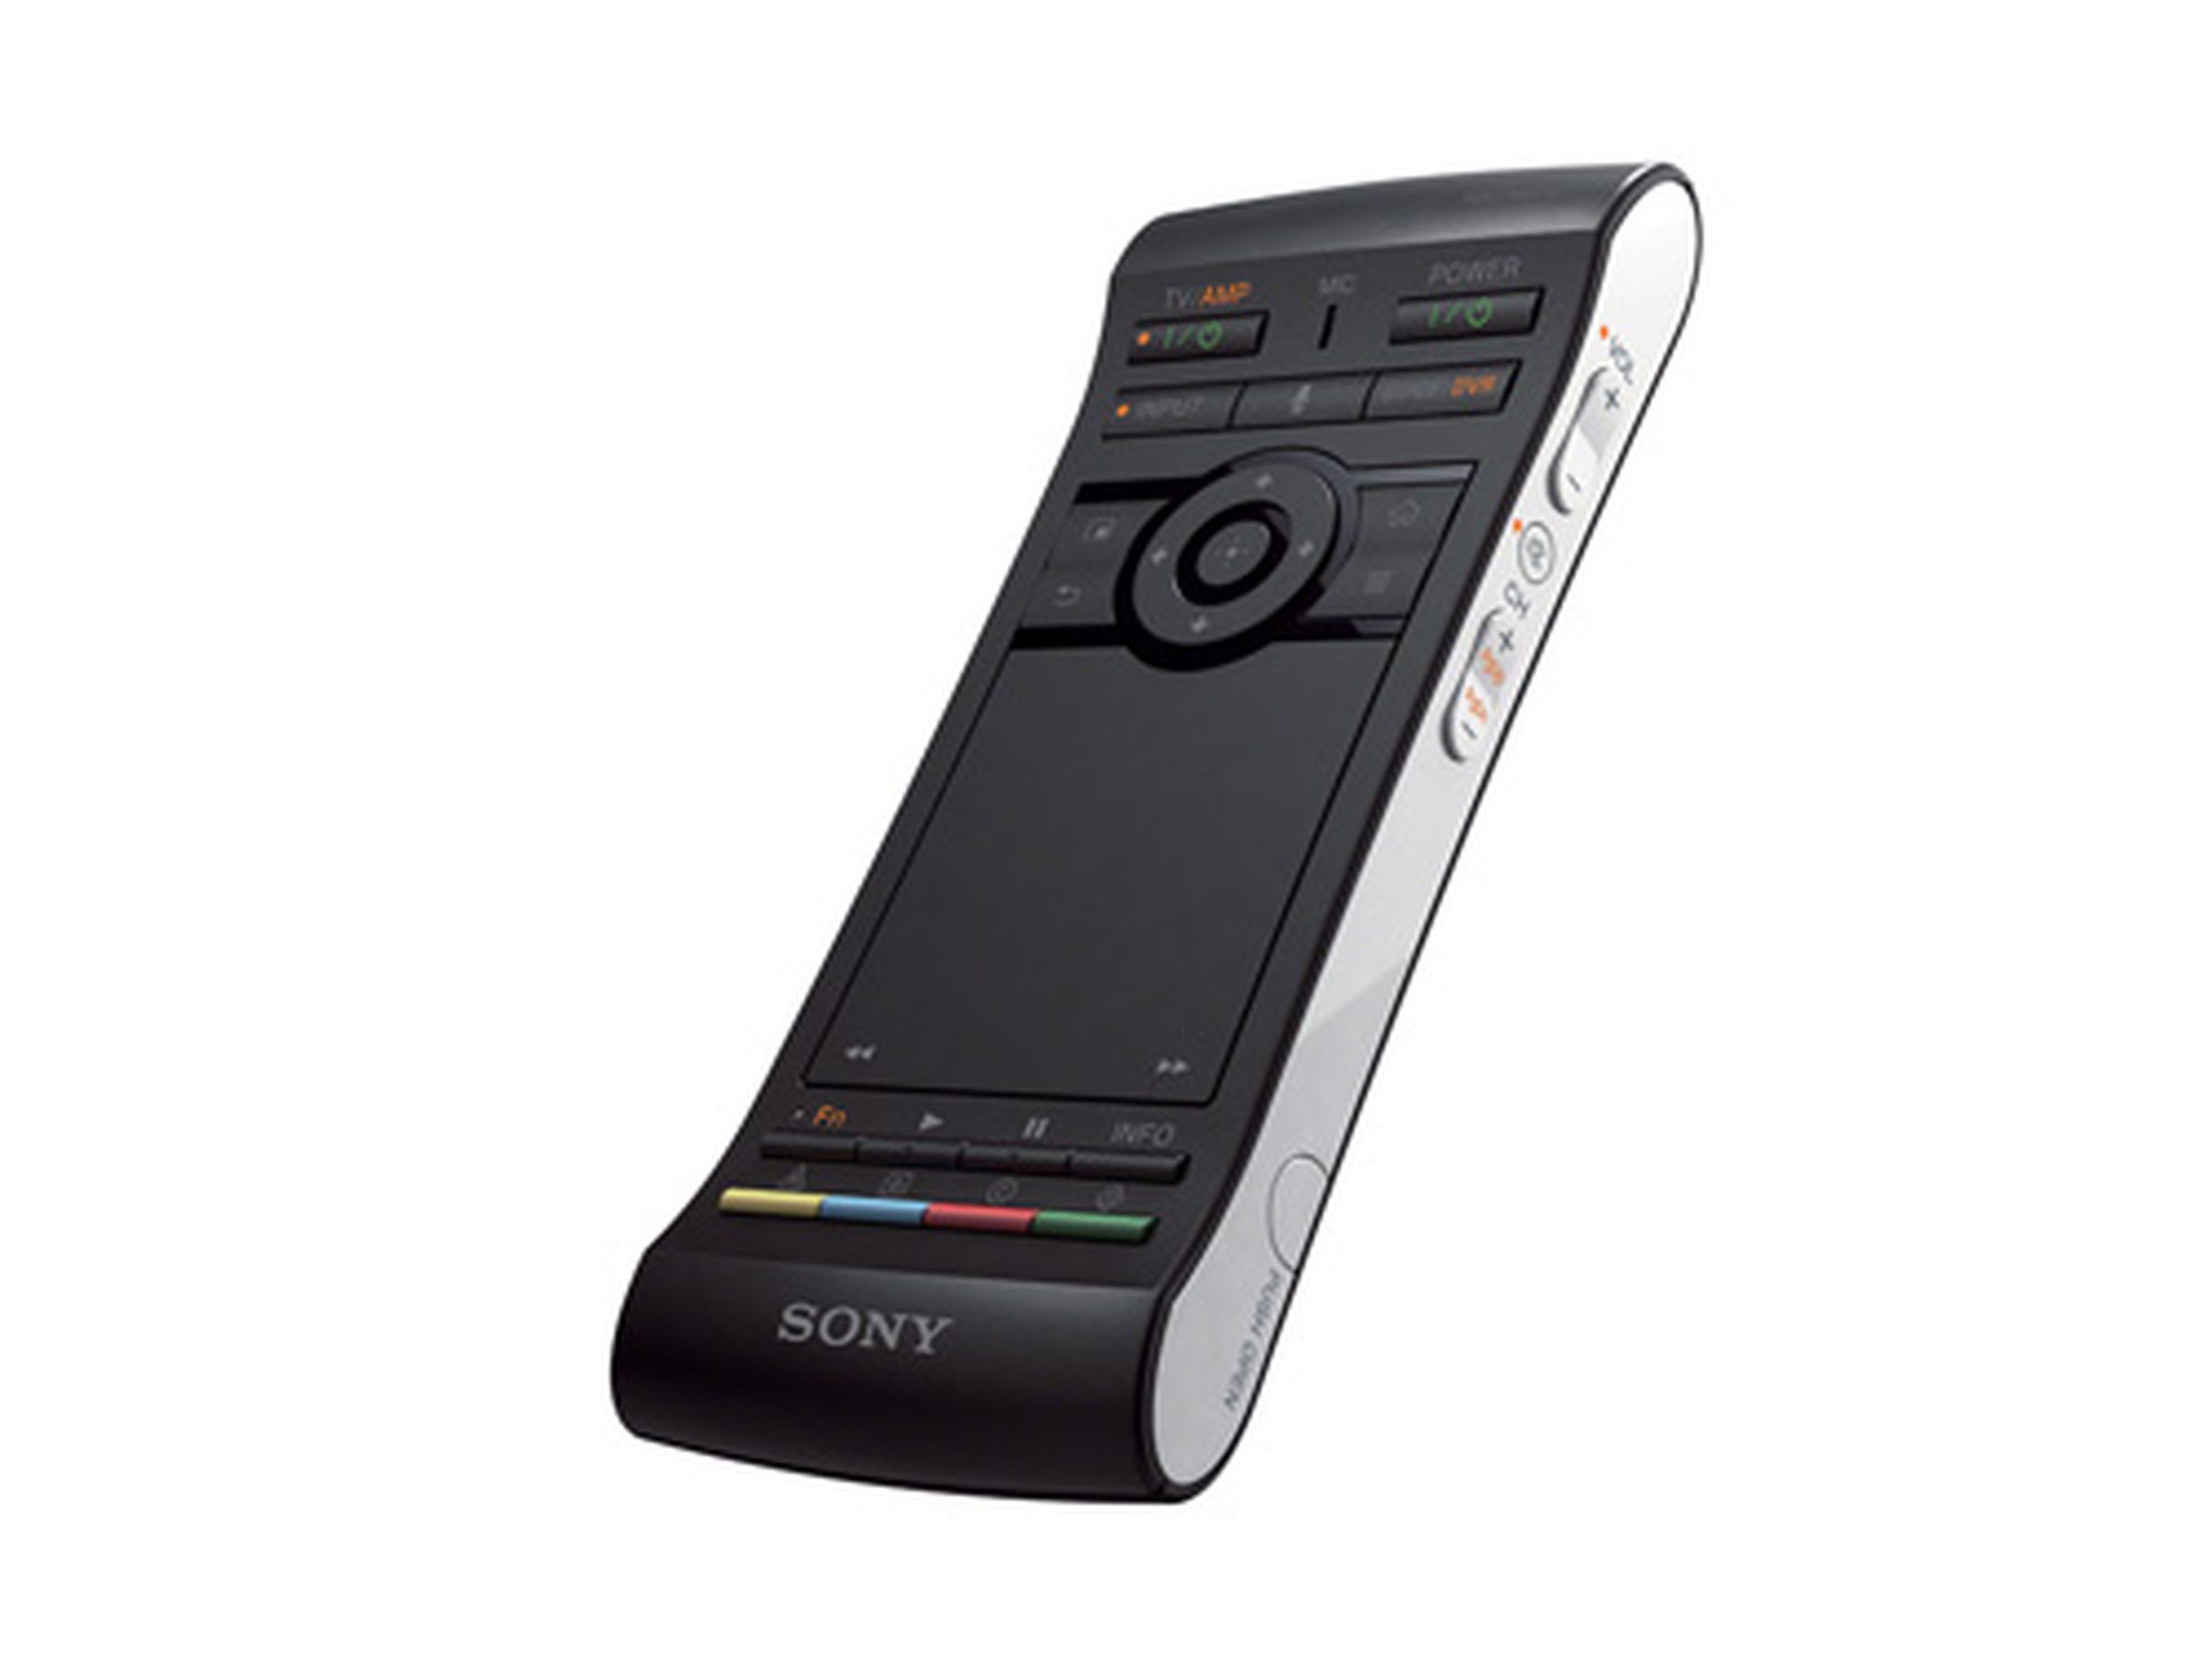 Sony Google TV NSZ-GP9 and NSZ-GS7 with motion remote